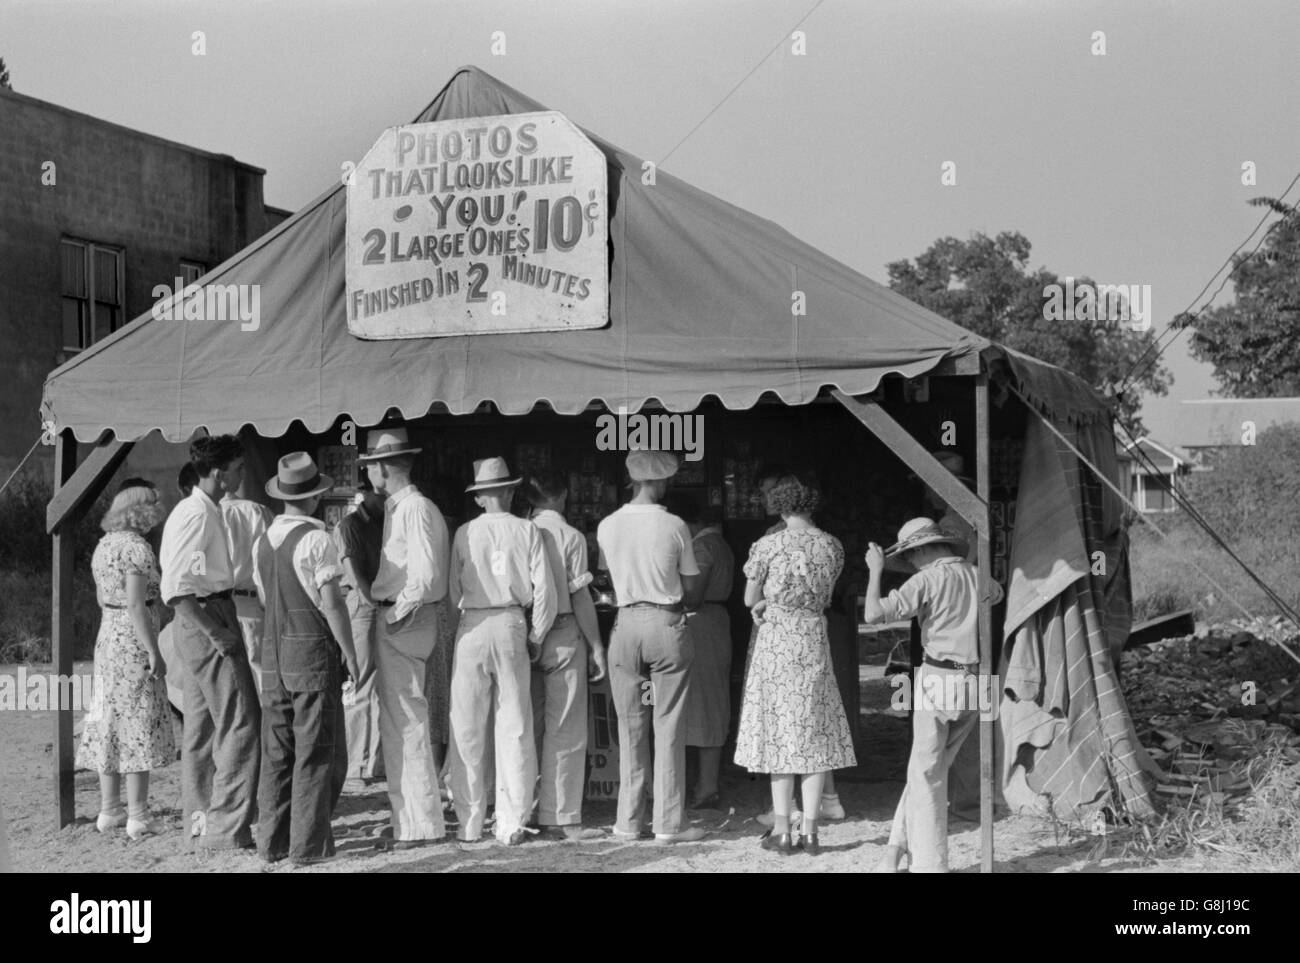 Crowd at Traveling Photographer's Tent, Steele, Missouri, USA, Russell Lee, August 1938 Stock Photo